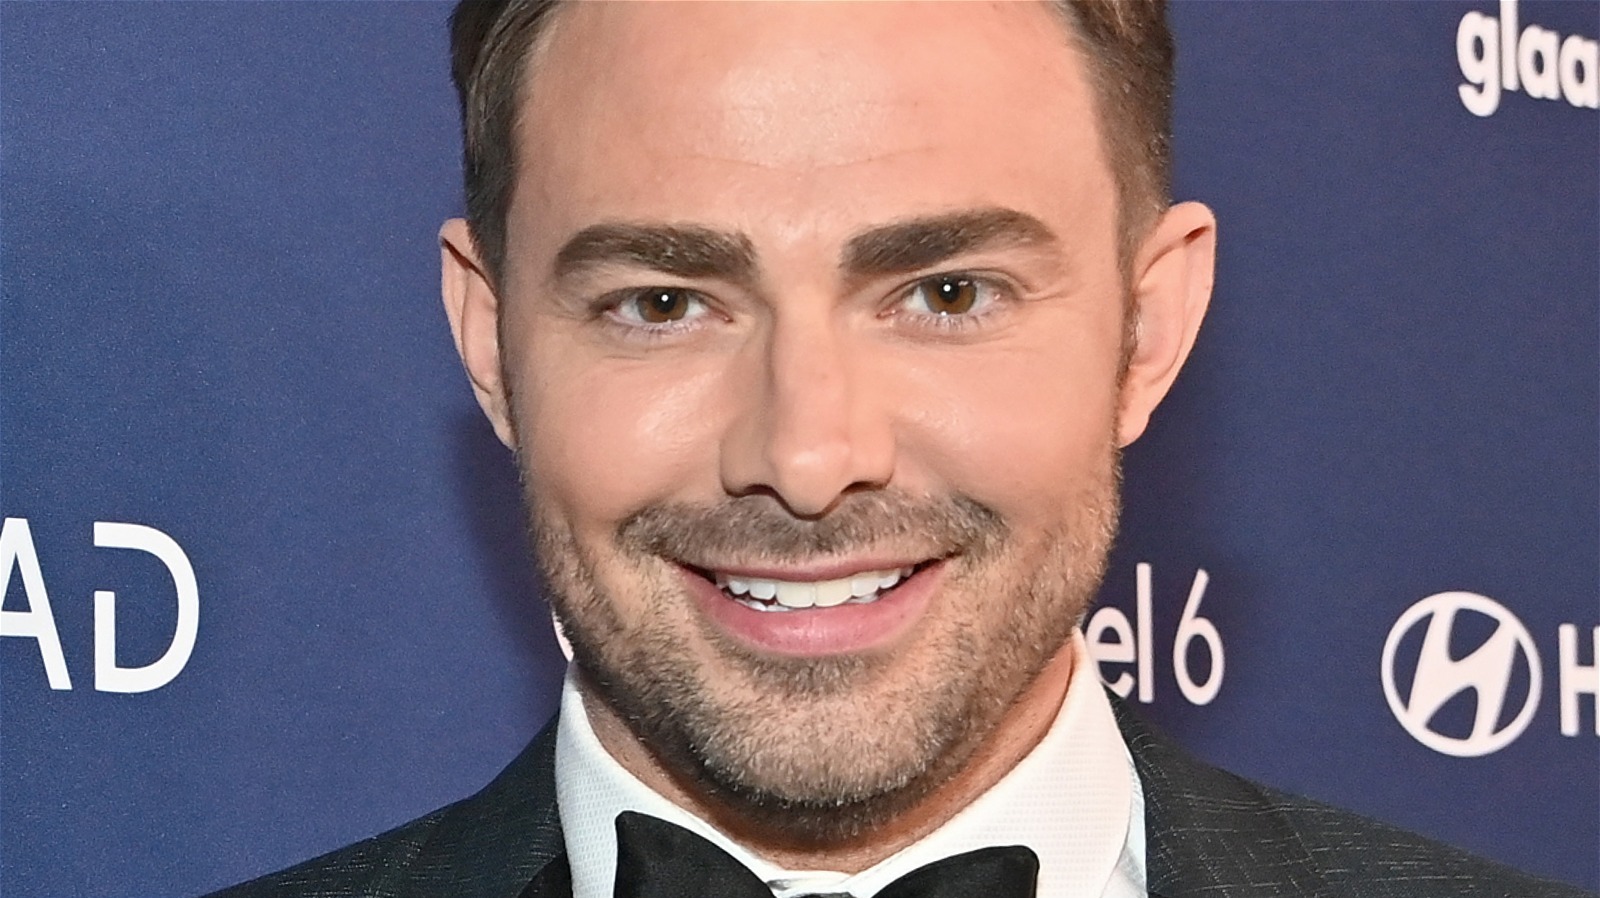 Jonathan Bennett's Comedic Advice For Hosting Food-Related Shows ...